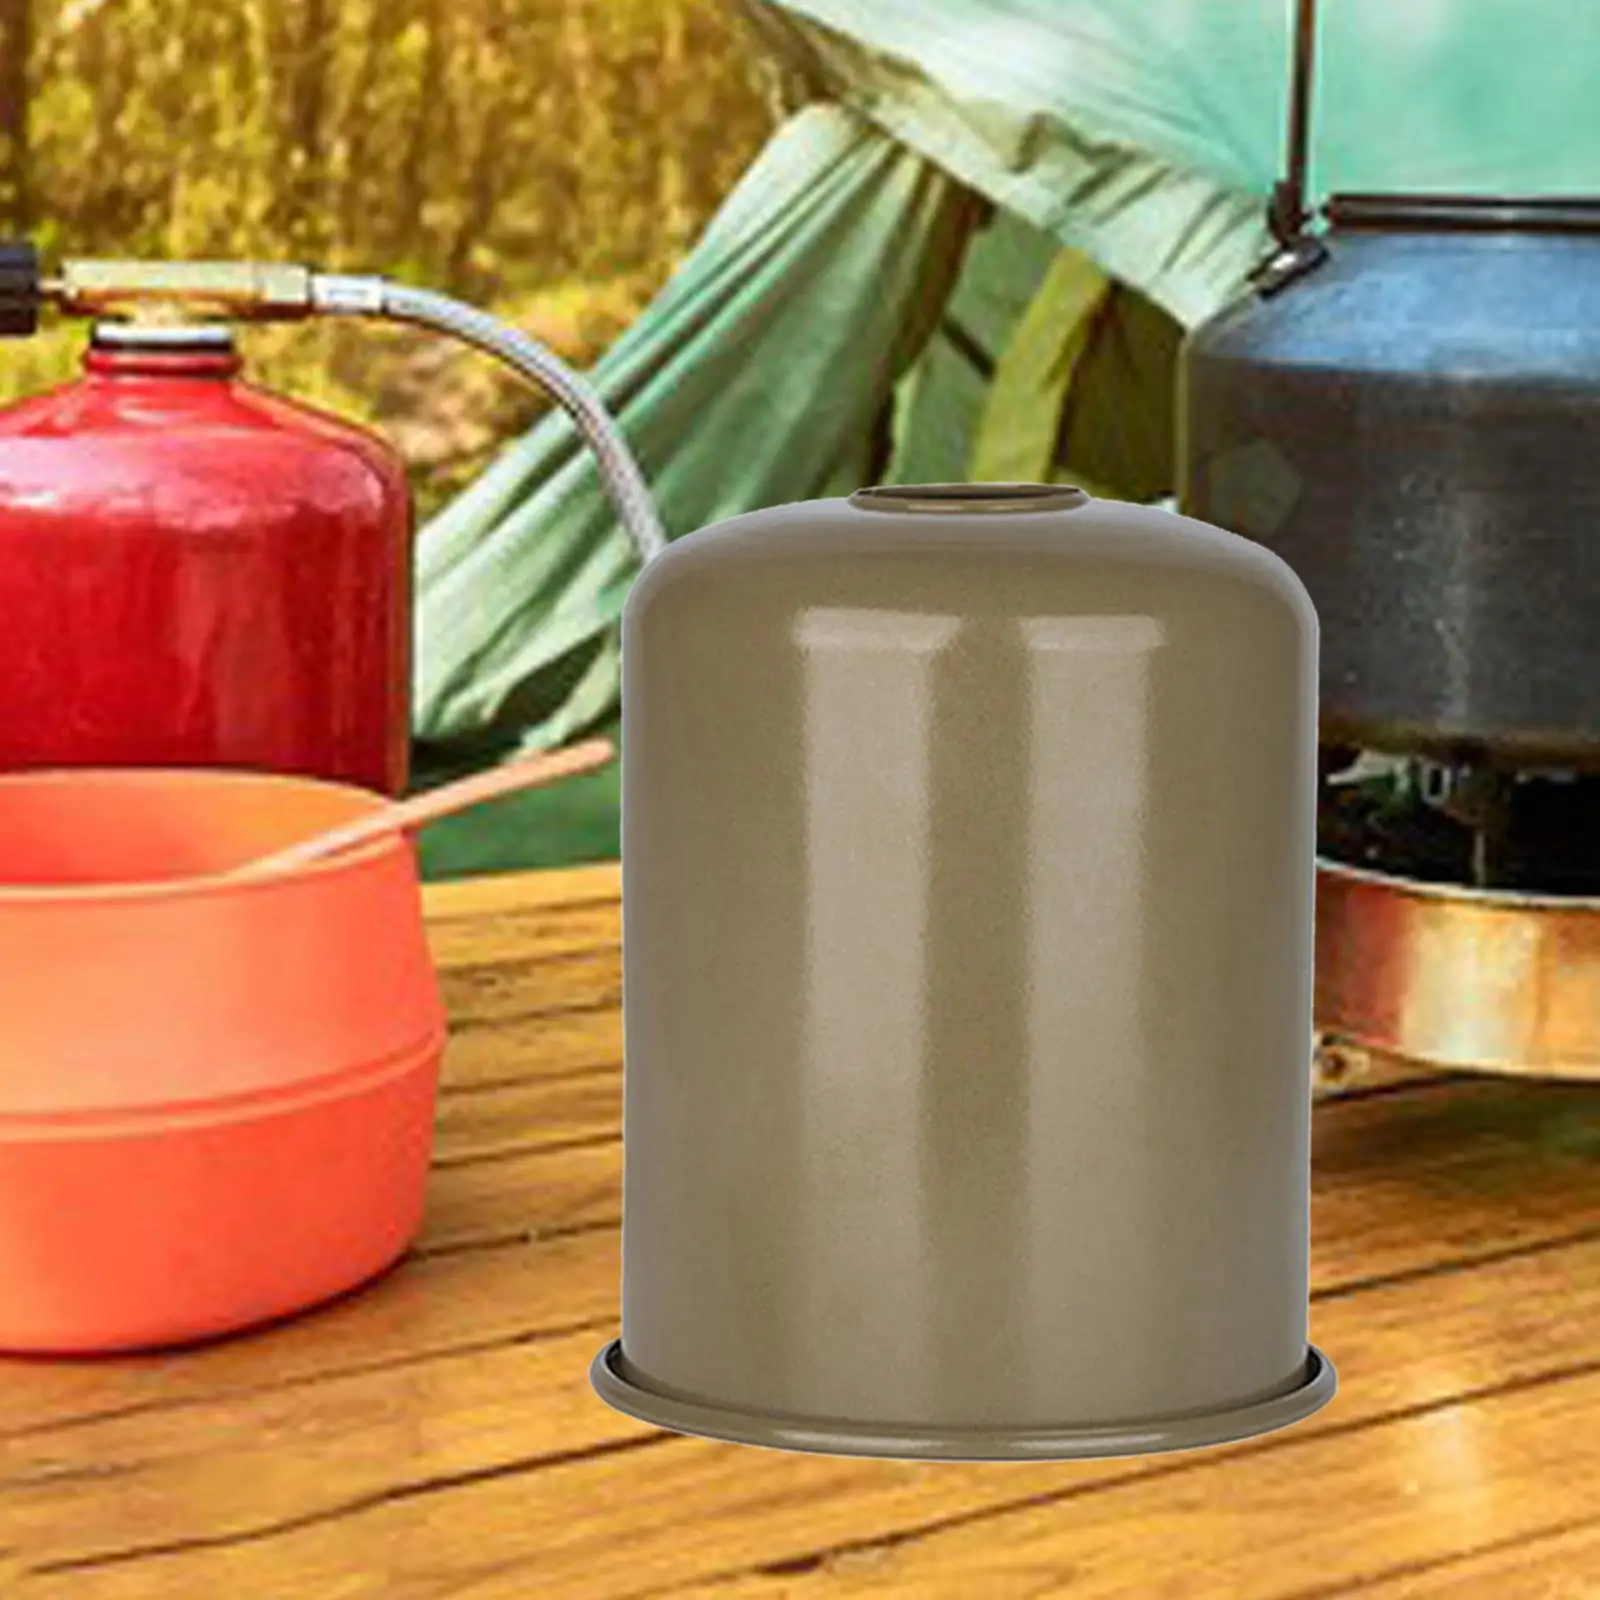 Gas Cylinder Tank Cover Hiking Weather Resistant 1x Protective Case Picnic BBQ Portable Durable Gas Can Case Gas Canister Cover